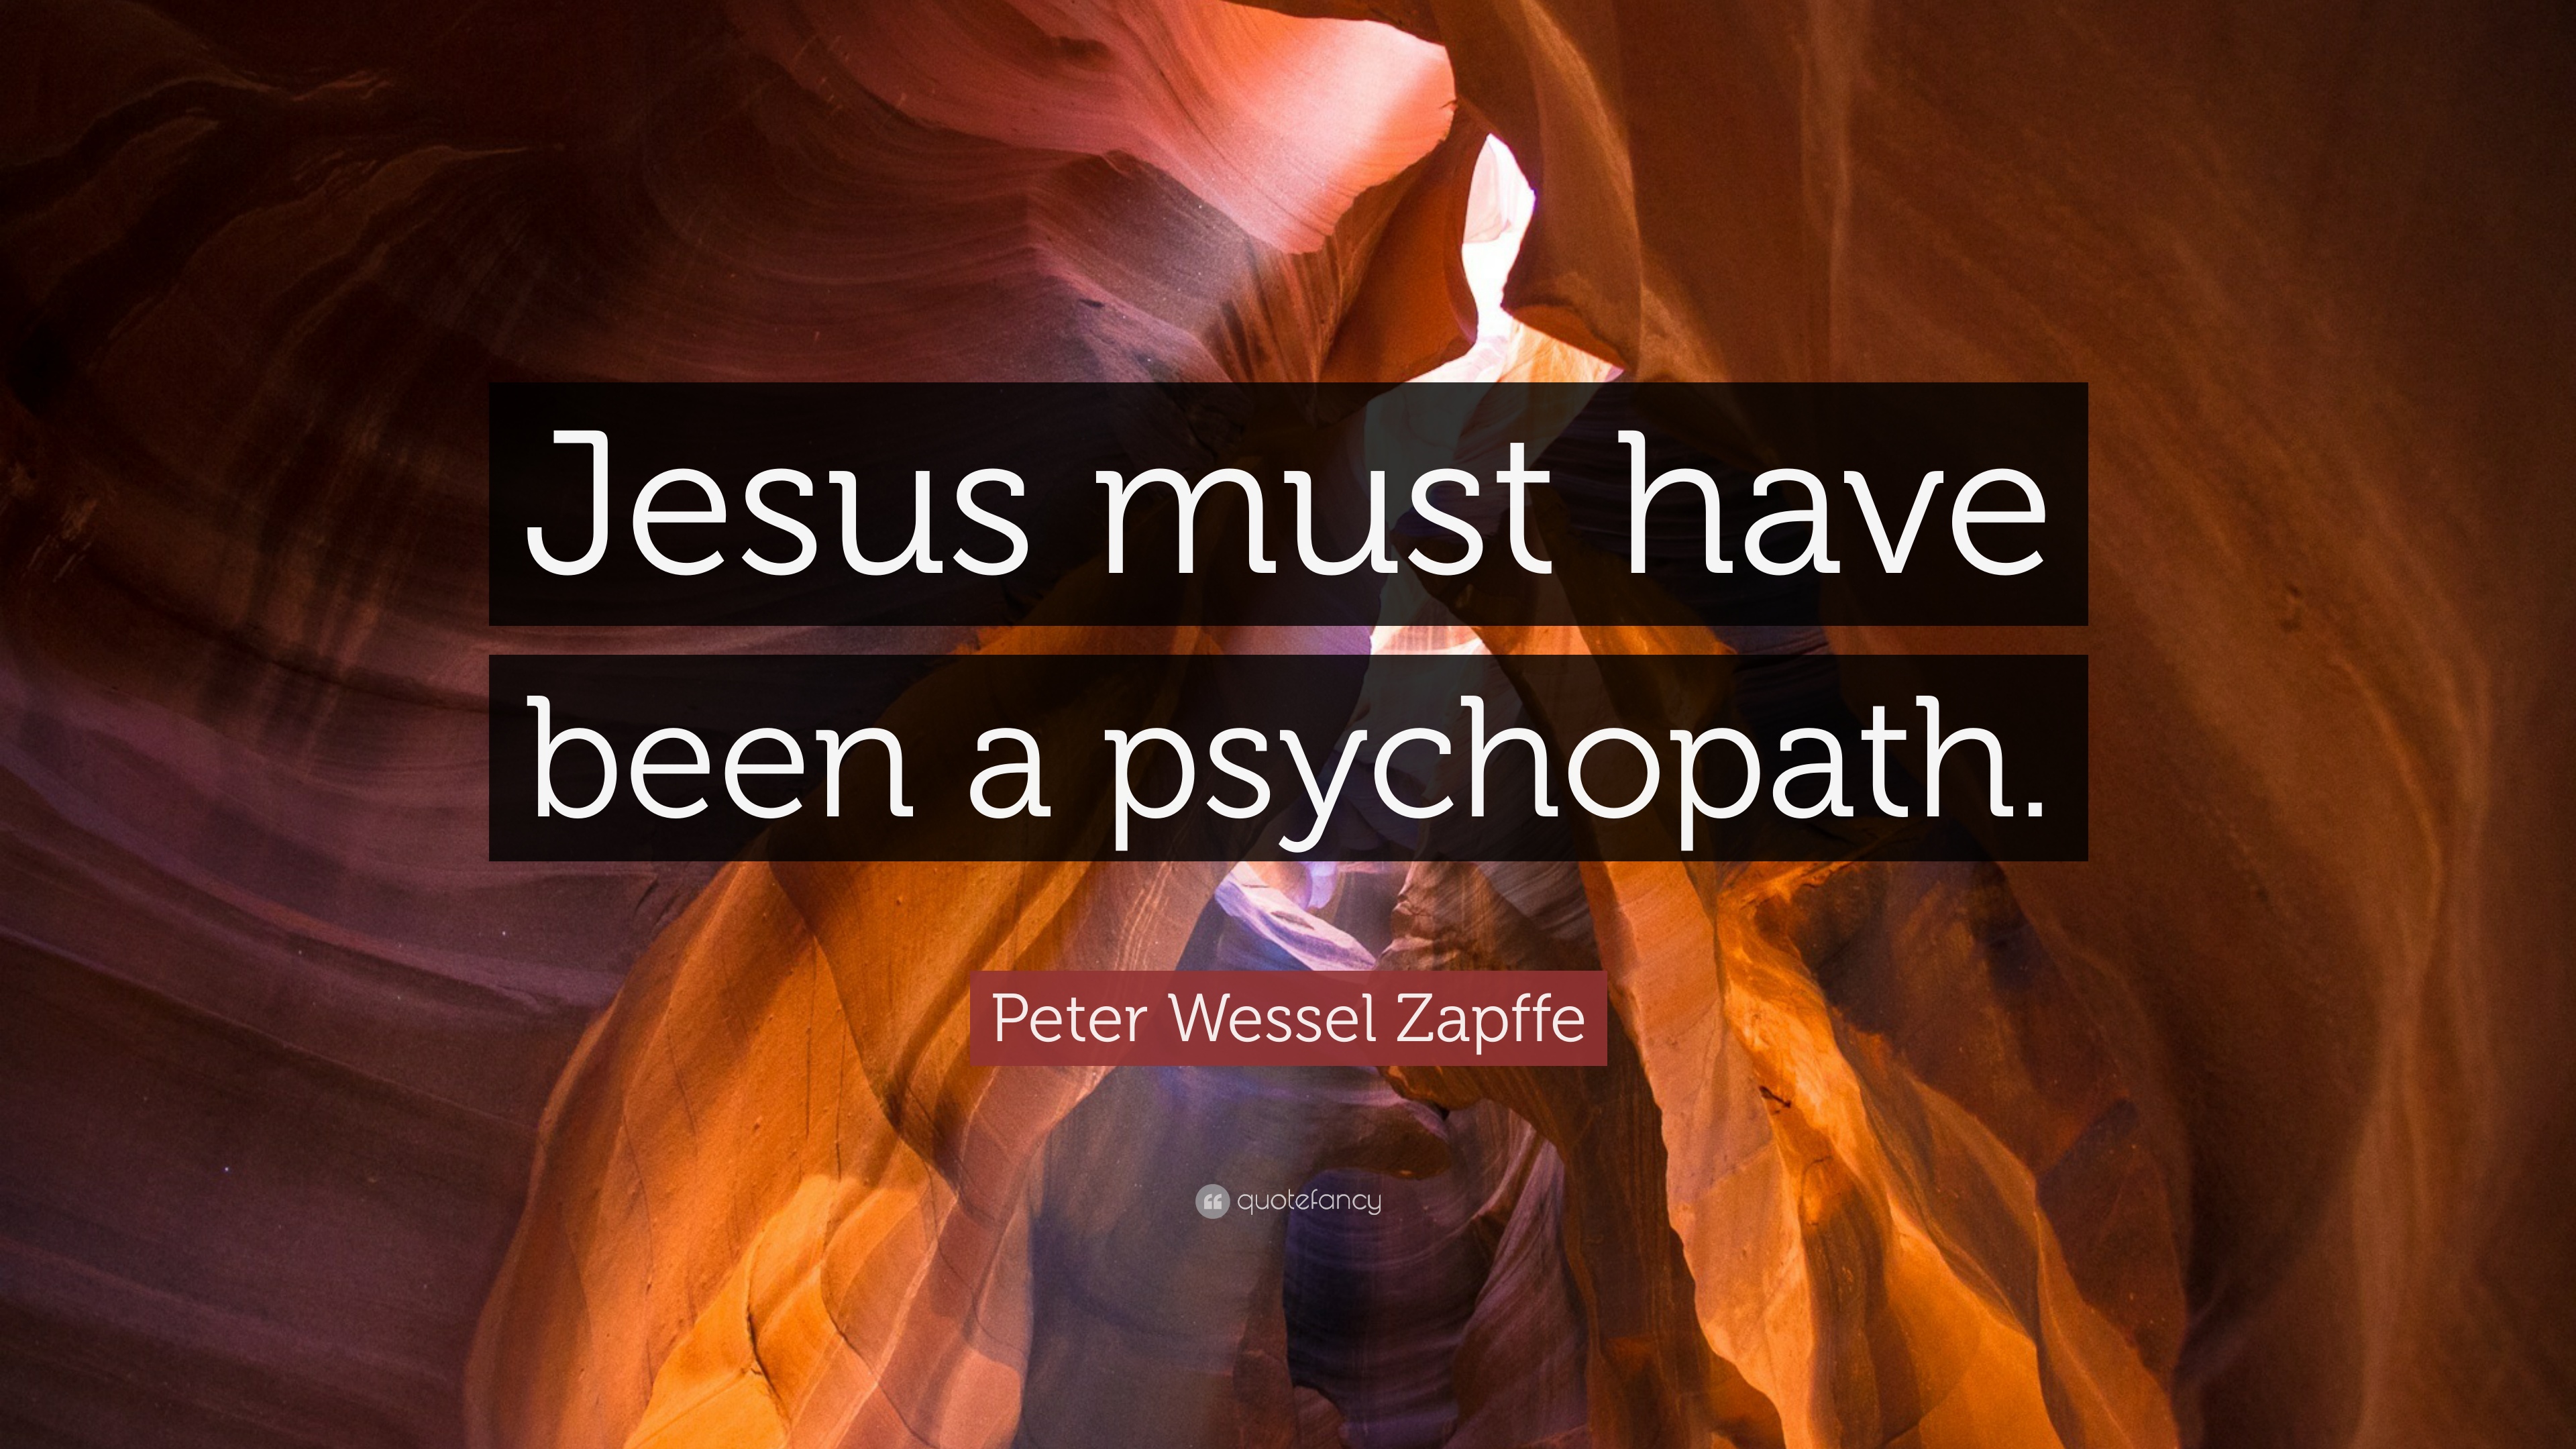 Peter Wessel Zapffe Quote: “Jesus must have been a psychopath.” 10